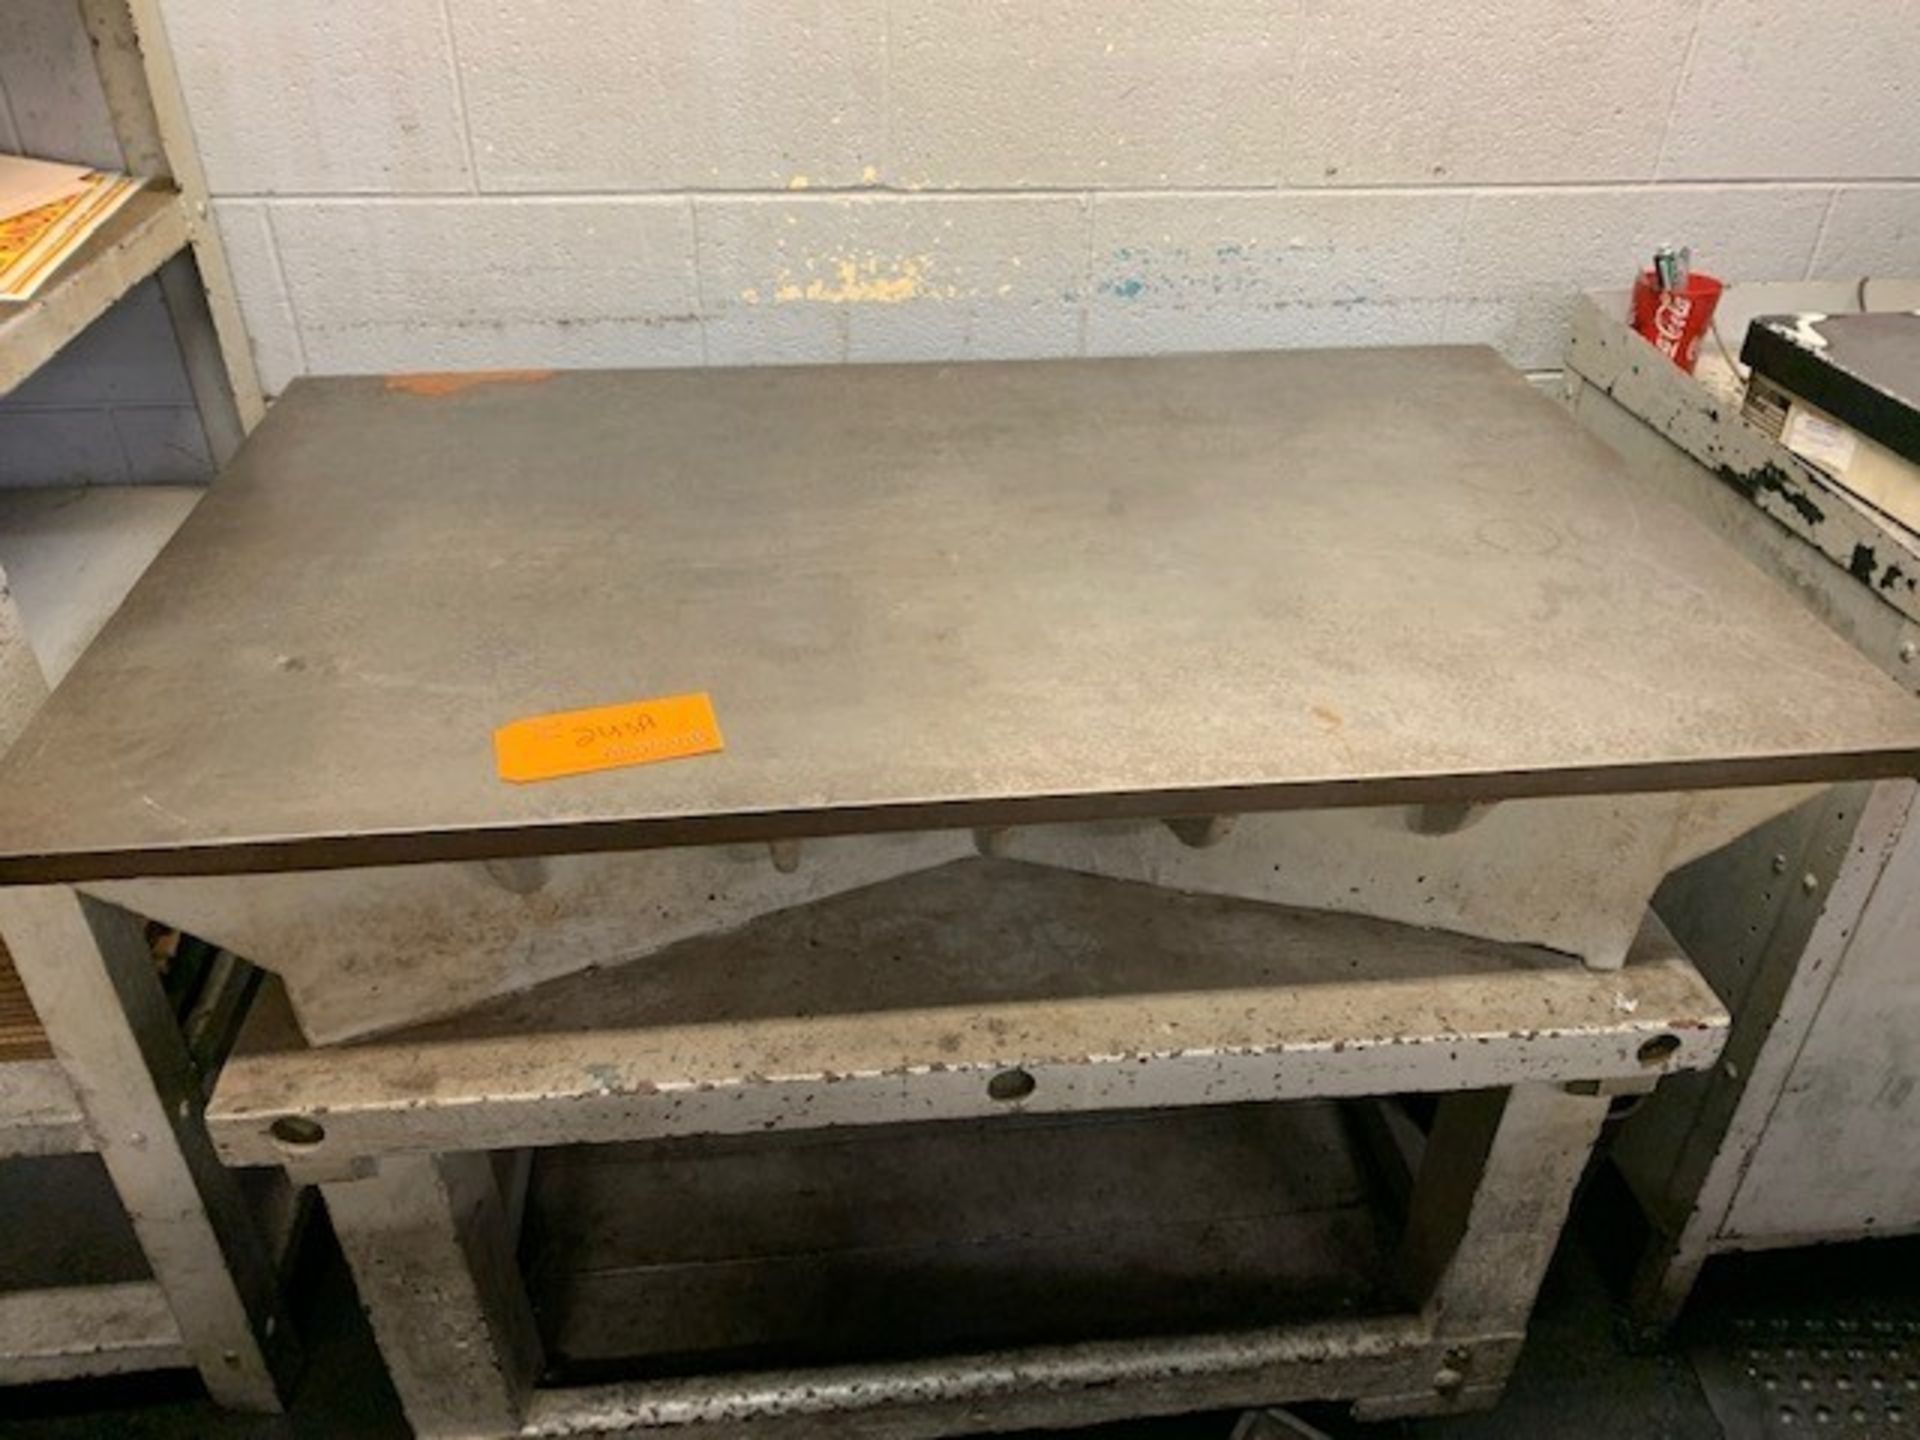 48" x 30" Steel layout table